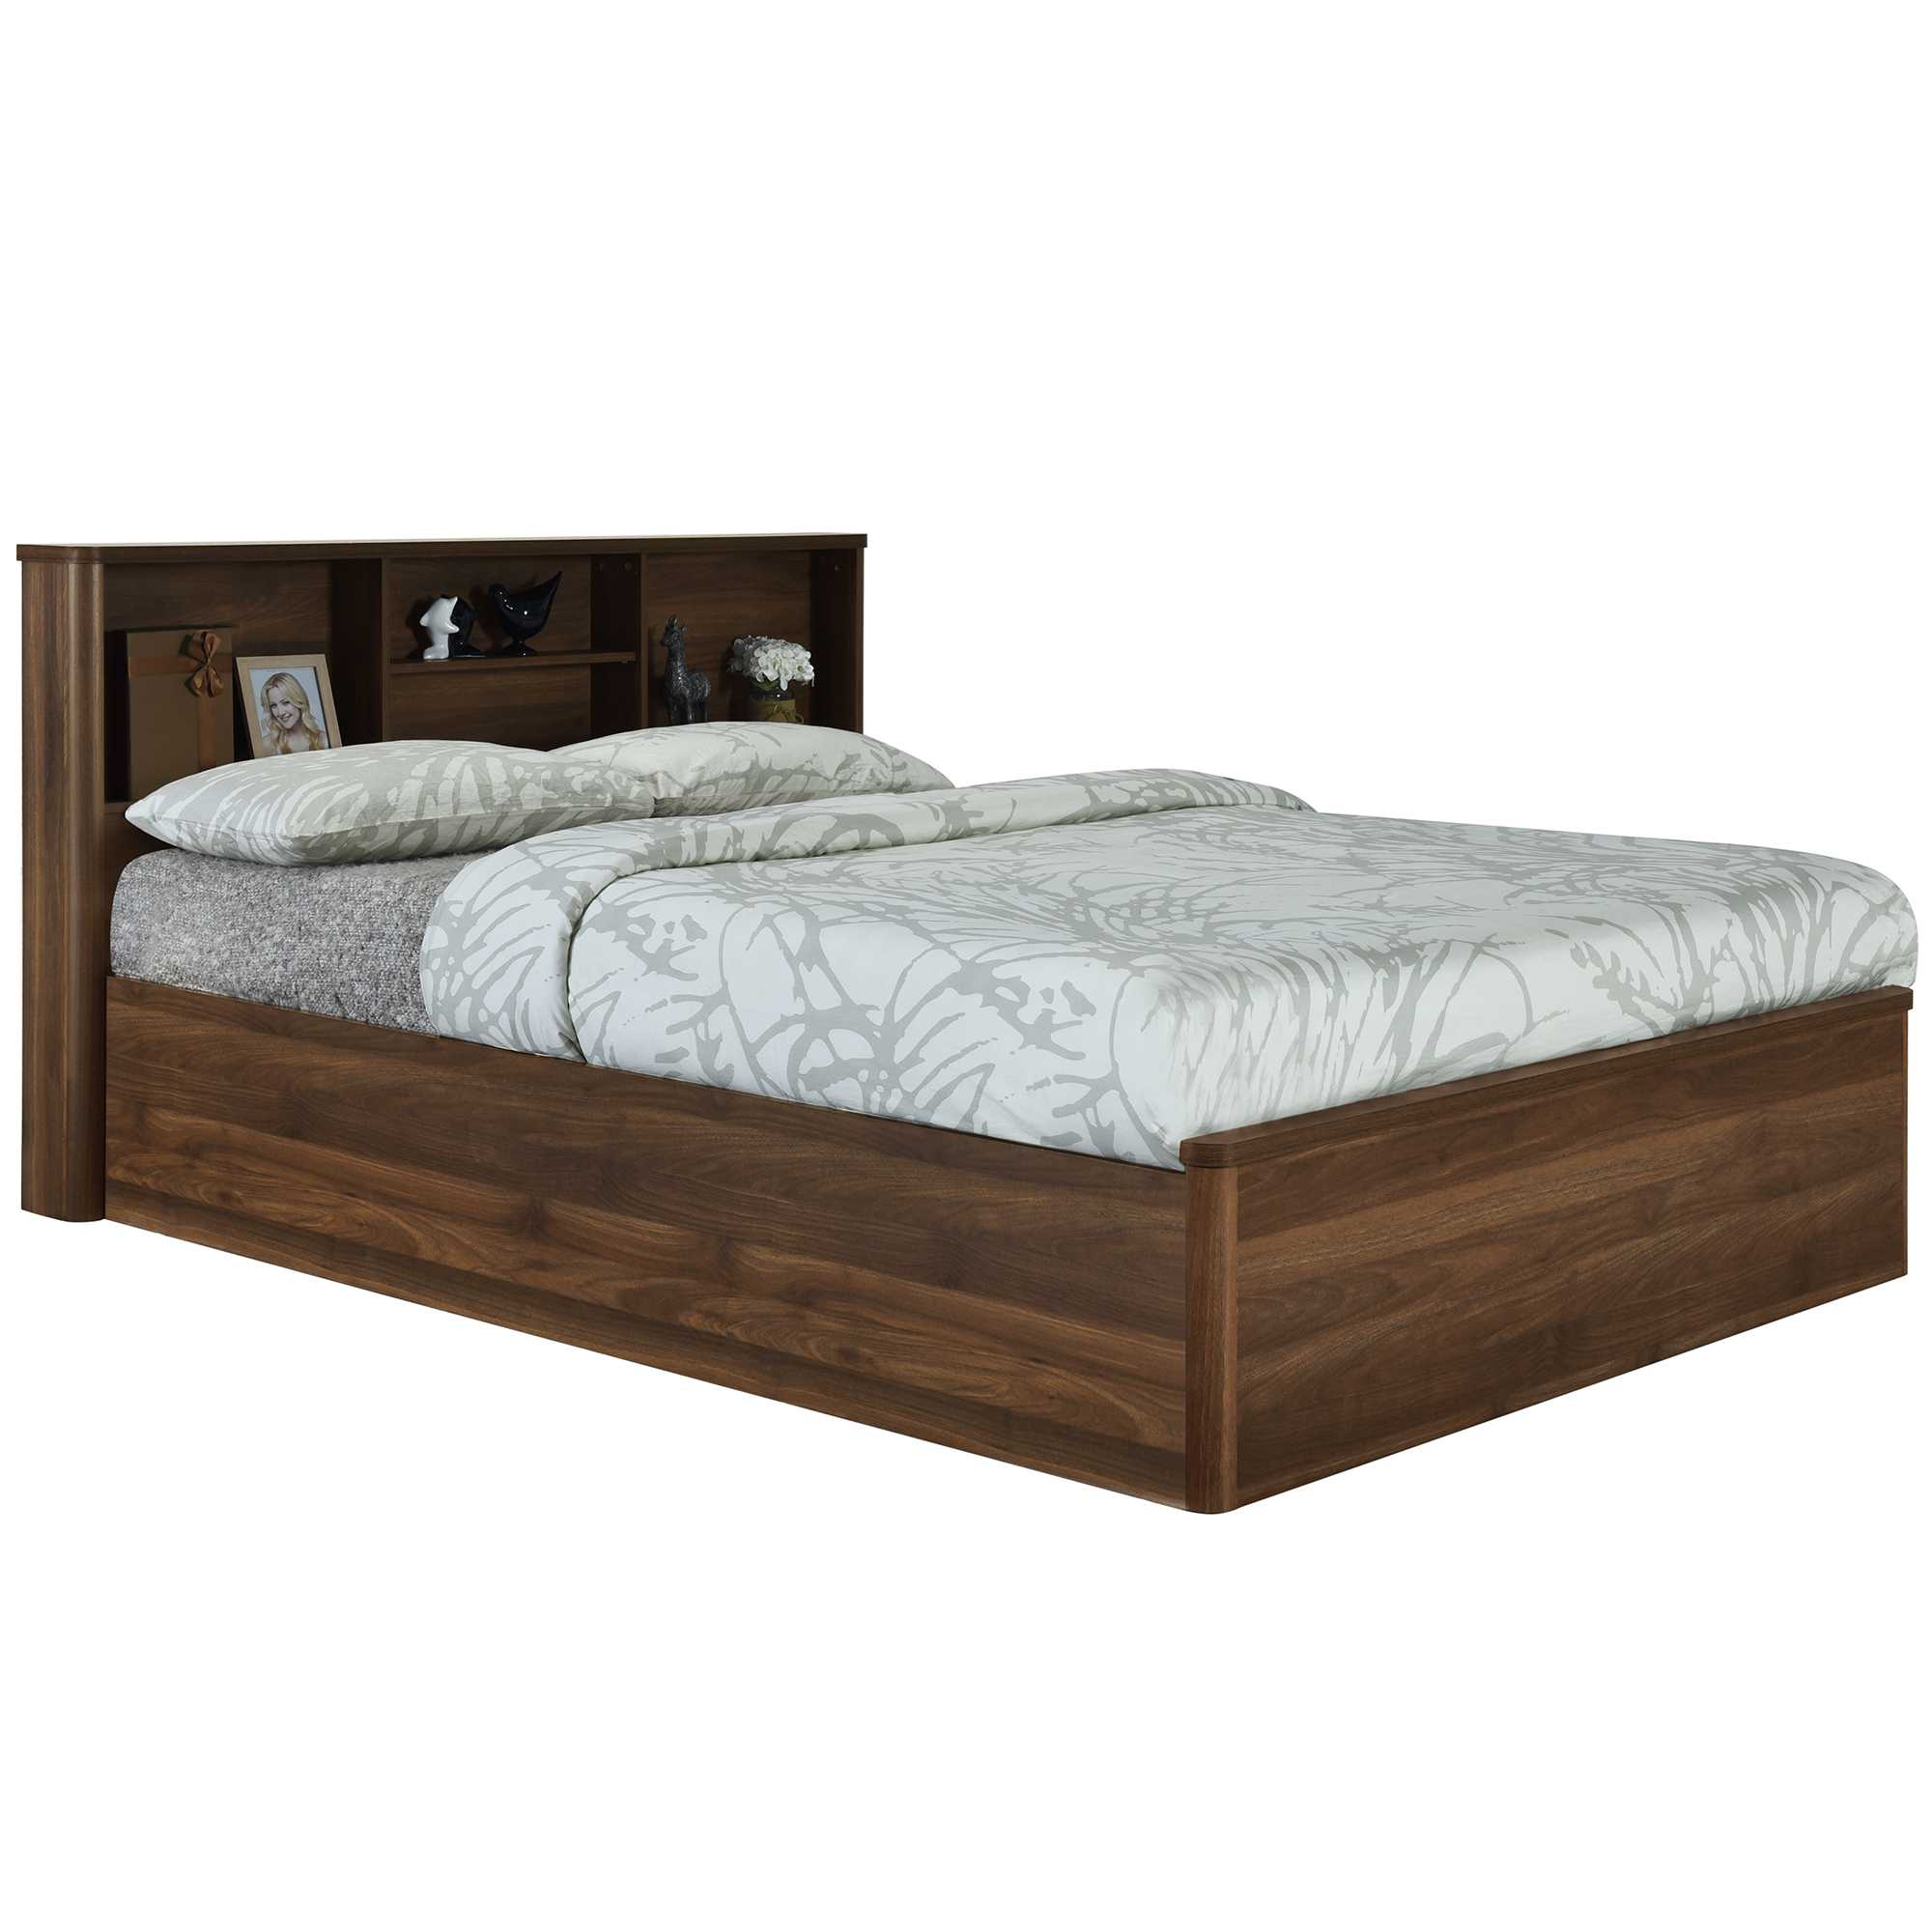 Kodu Anderson Queen Bed With Bookcase Headboard Reviews Temple